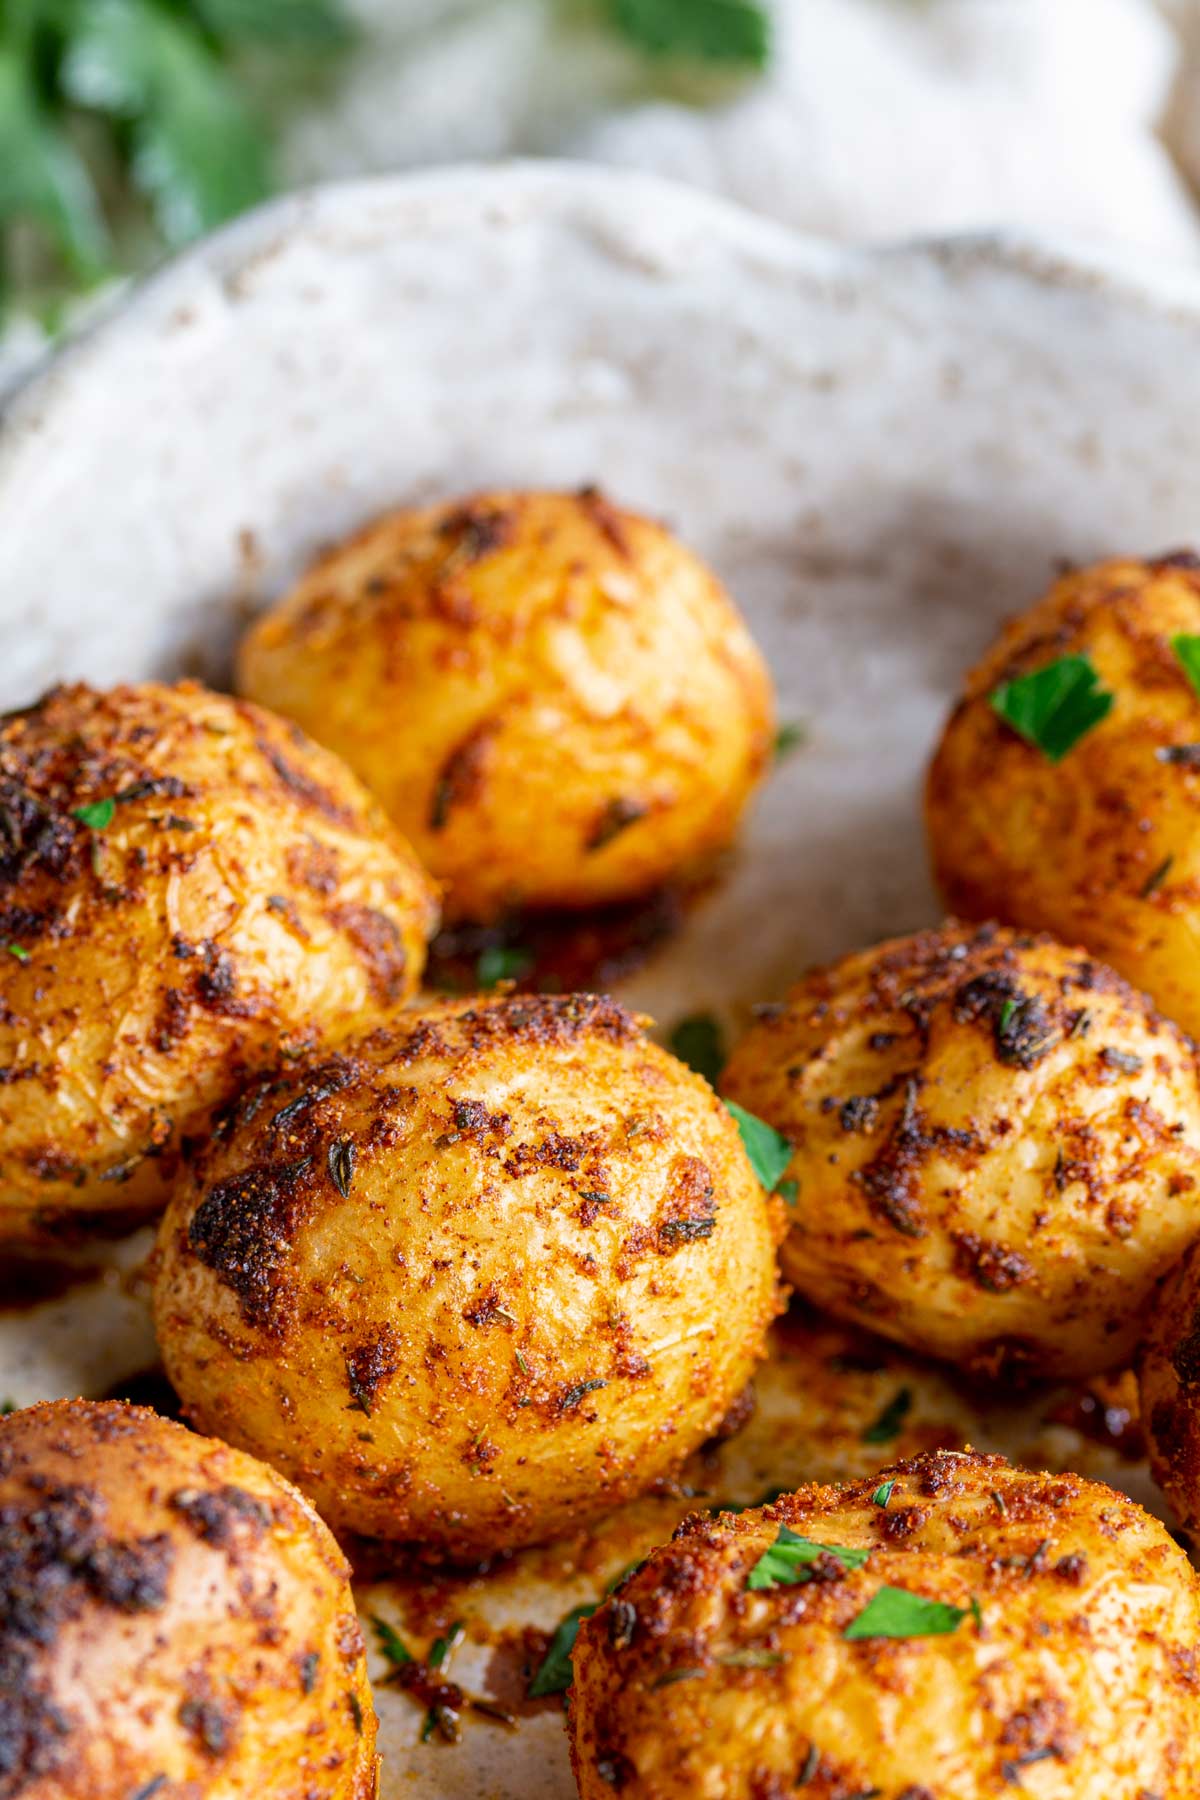 A Rustic dish of cooked potatoes coated in a red spice blend